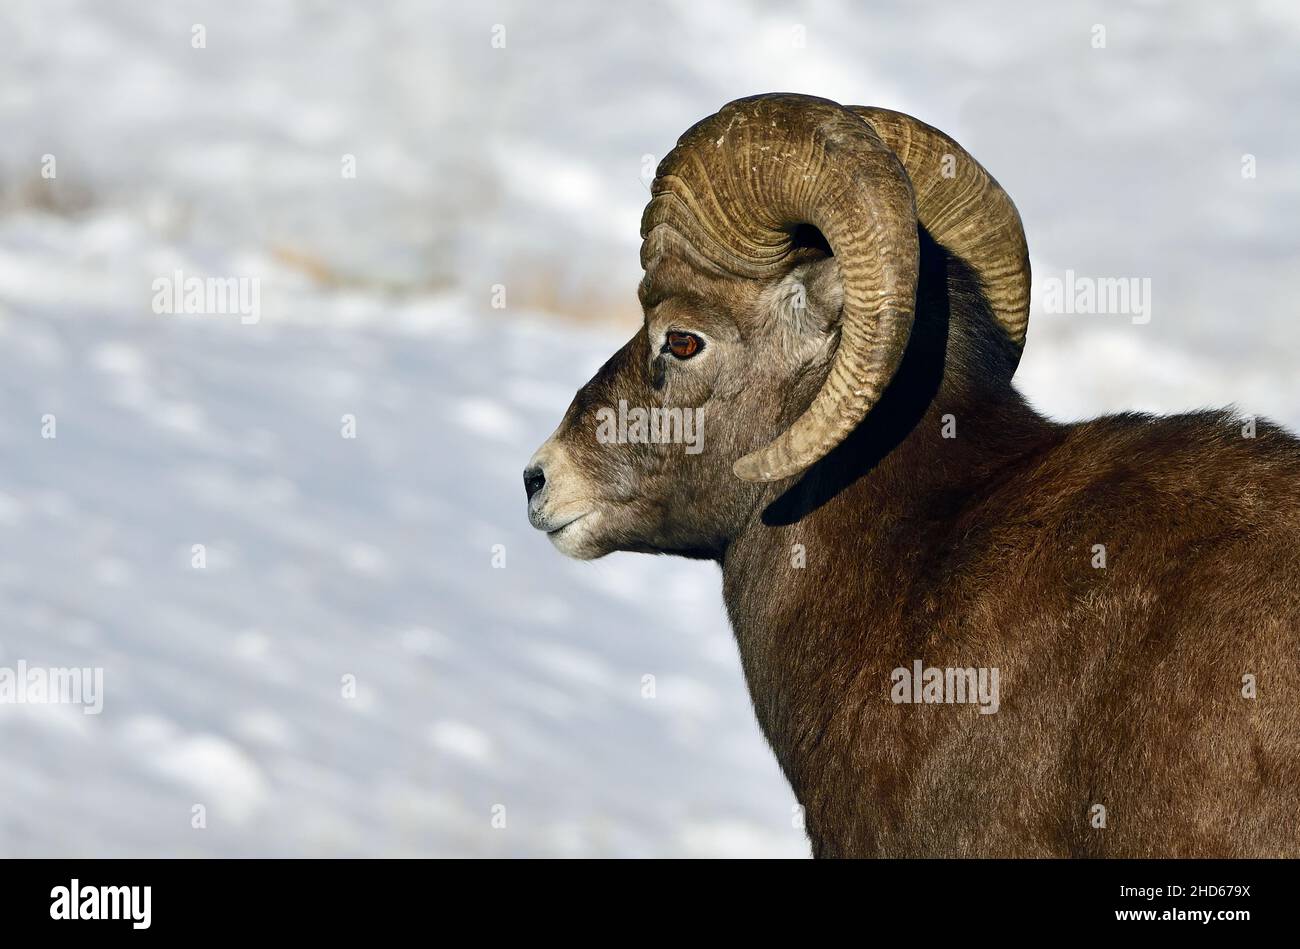 A portrait image of a wild Rocky Mountain Bighorn Sheep 'Ovis canadensis', in the winter snow. Stock Photo